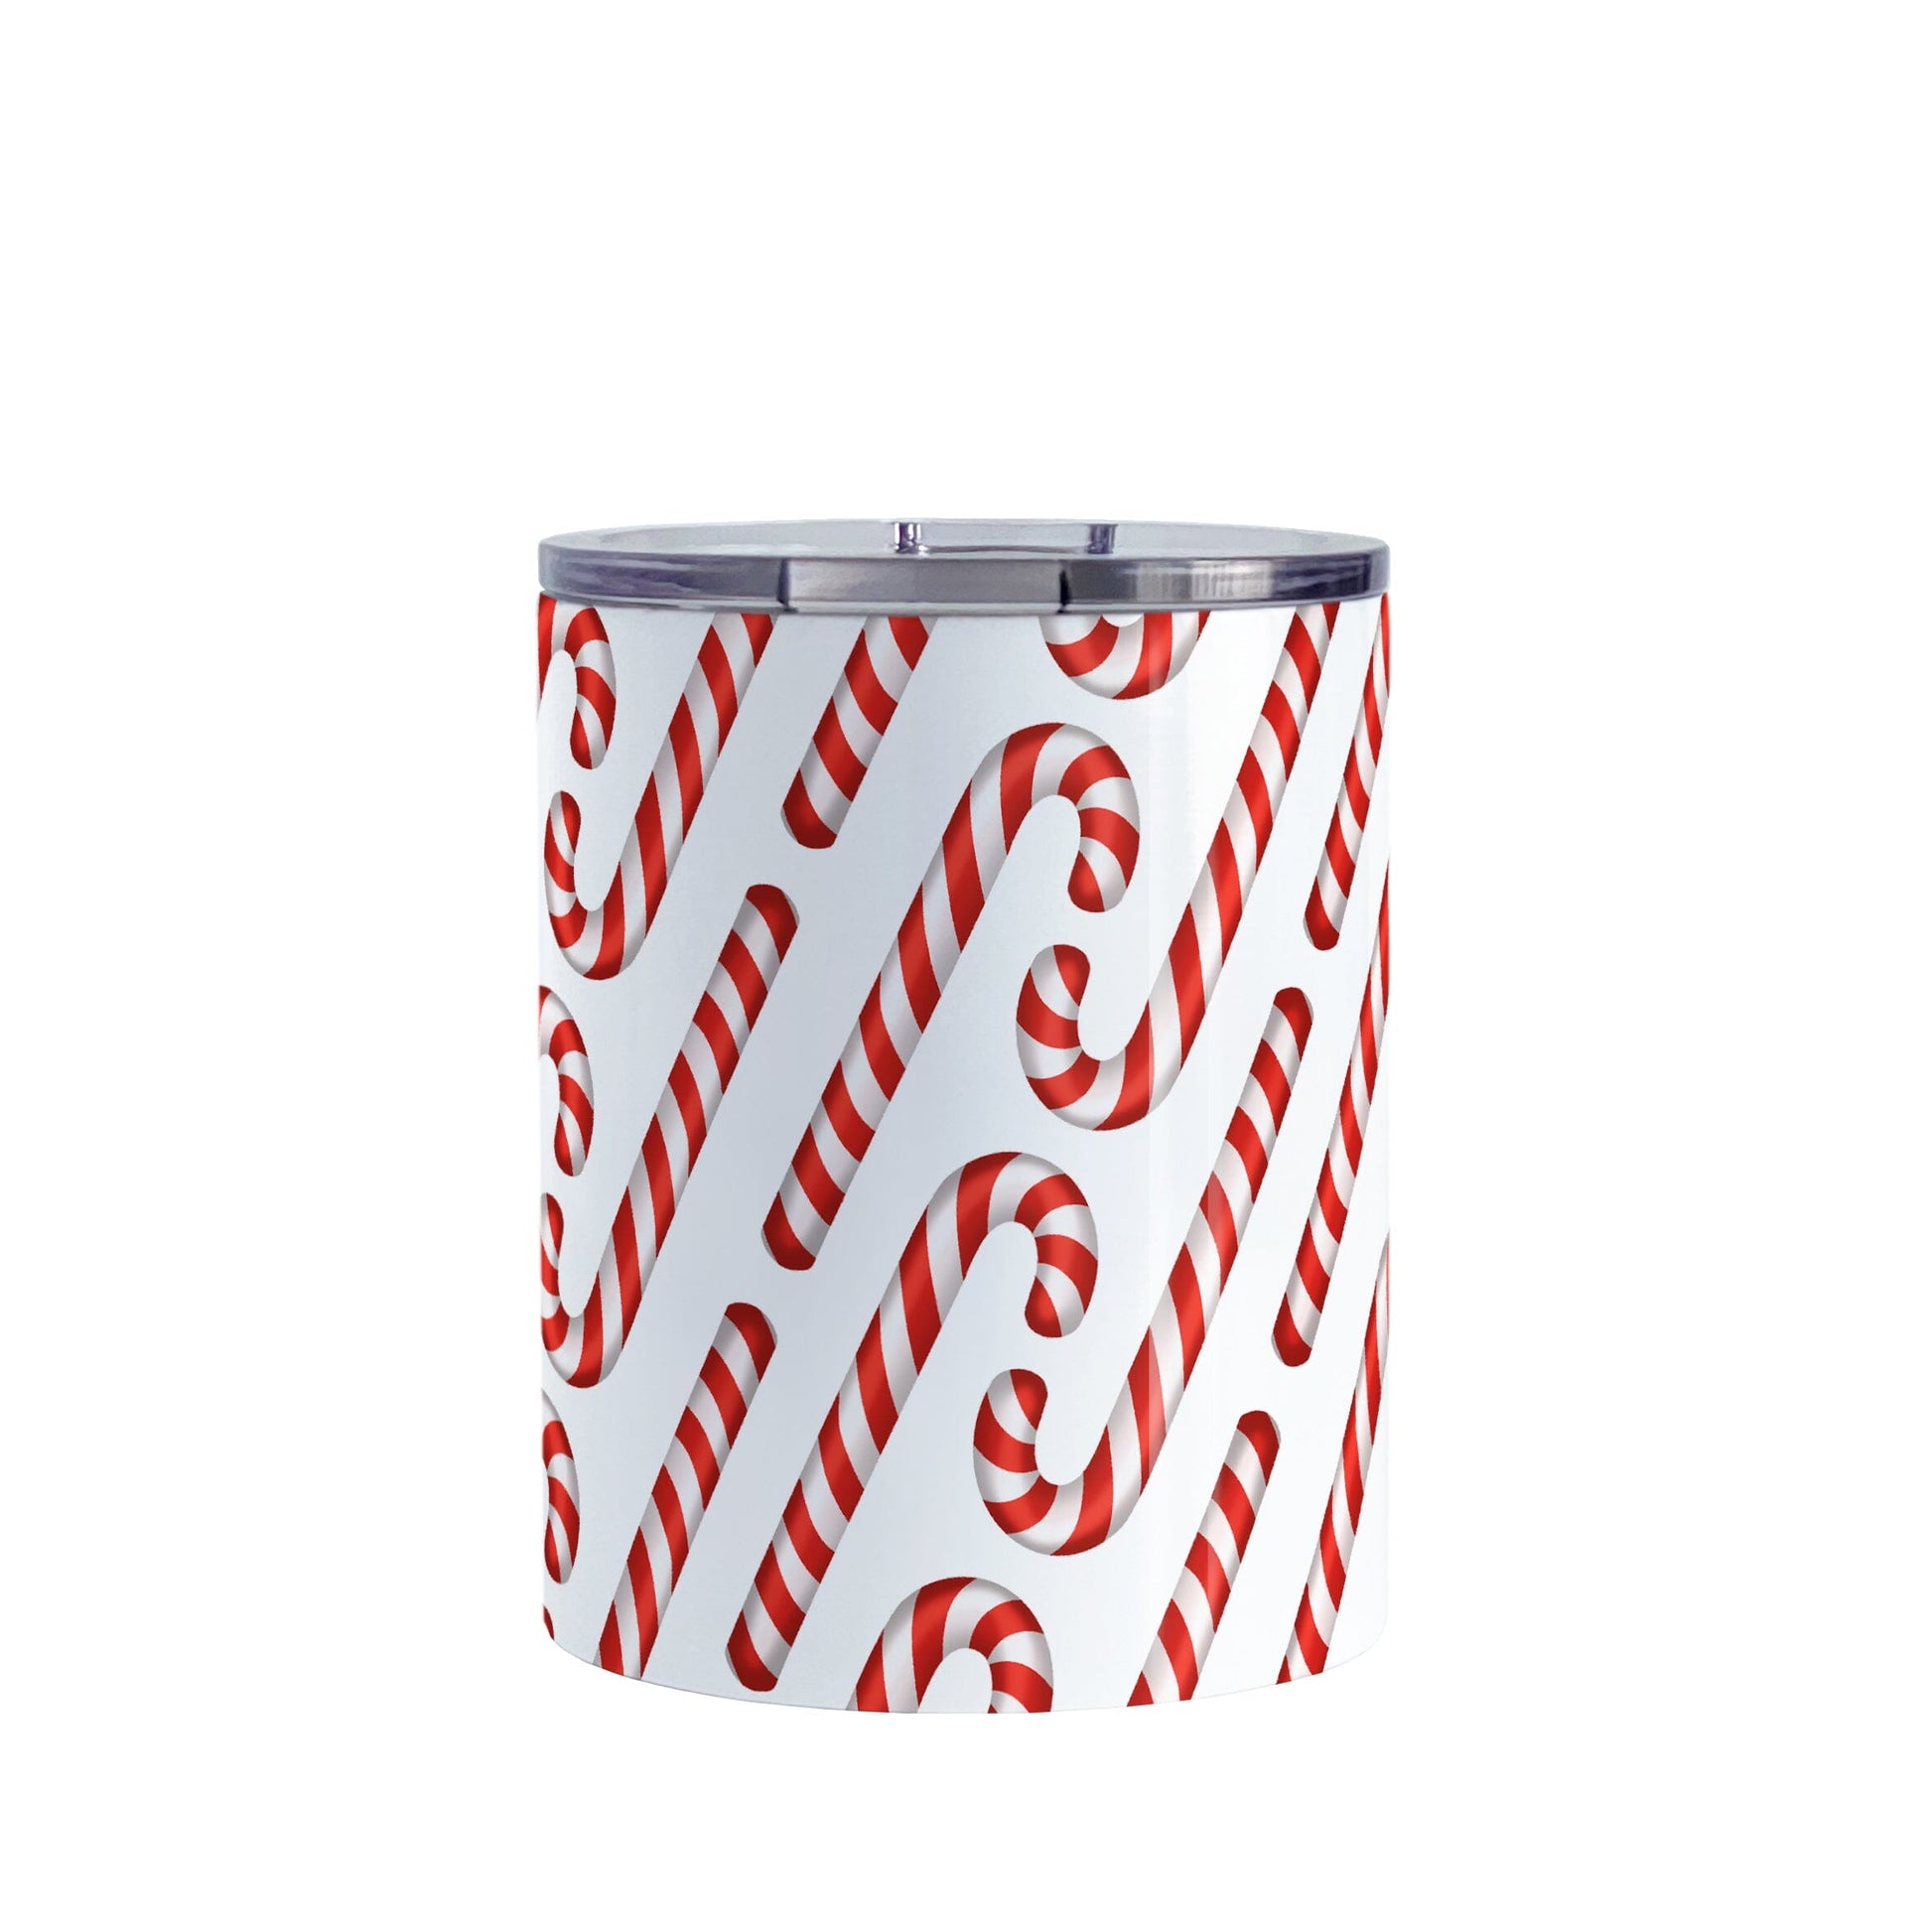 Candy Cane Pattern Tumbler Cup (10oz) at Amy's Coffee Mugs. A stainless steel tumbler cup designed with a diagonal pattern of red and white striped candy canes that wraps around the cup.